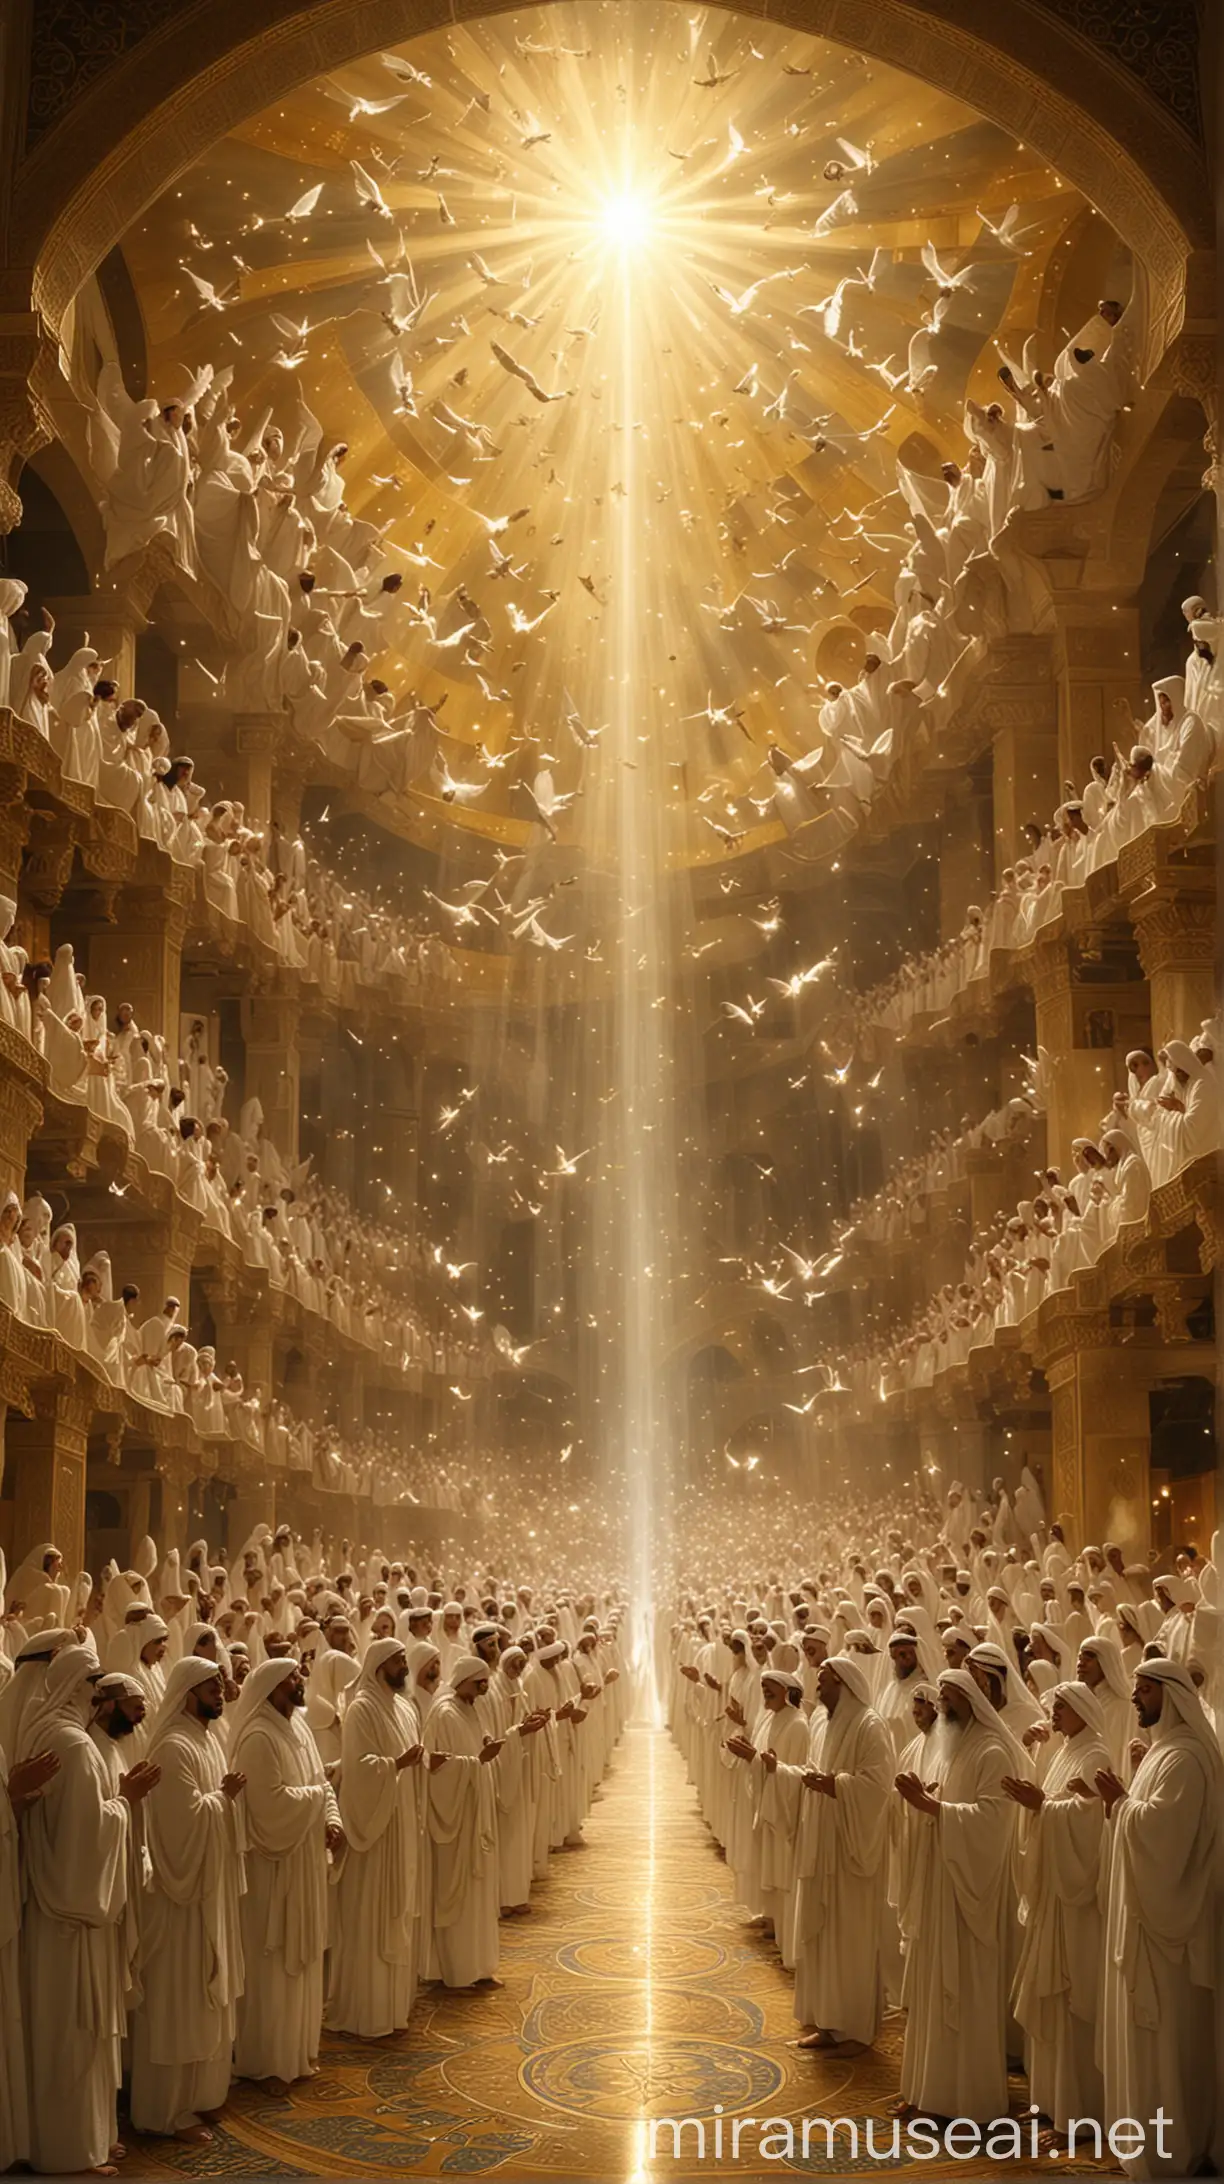 Prompt: An ethereal image of Al-Bayt Al-Ma'mur in the seventh heaven, with angels in radiant, flowing robes circling around it in worship.
Description: The celestial Al-Bayt Al-Ma'mur, bathed in divine light, surrounded by 70,000 angels in constant motion, each shimmering with a soft, heavenly glow, highlighting the perpetual nature of their worship.